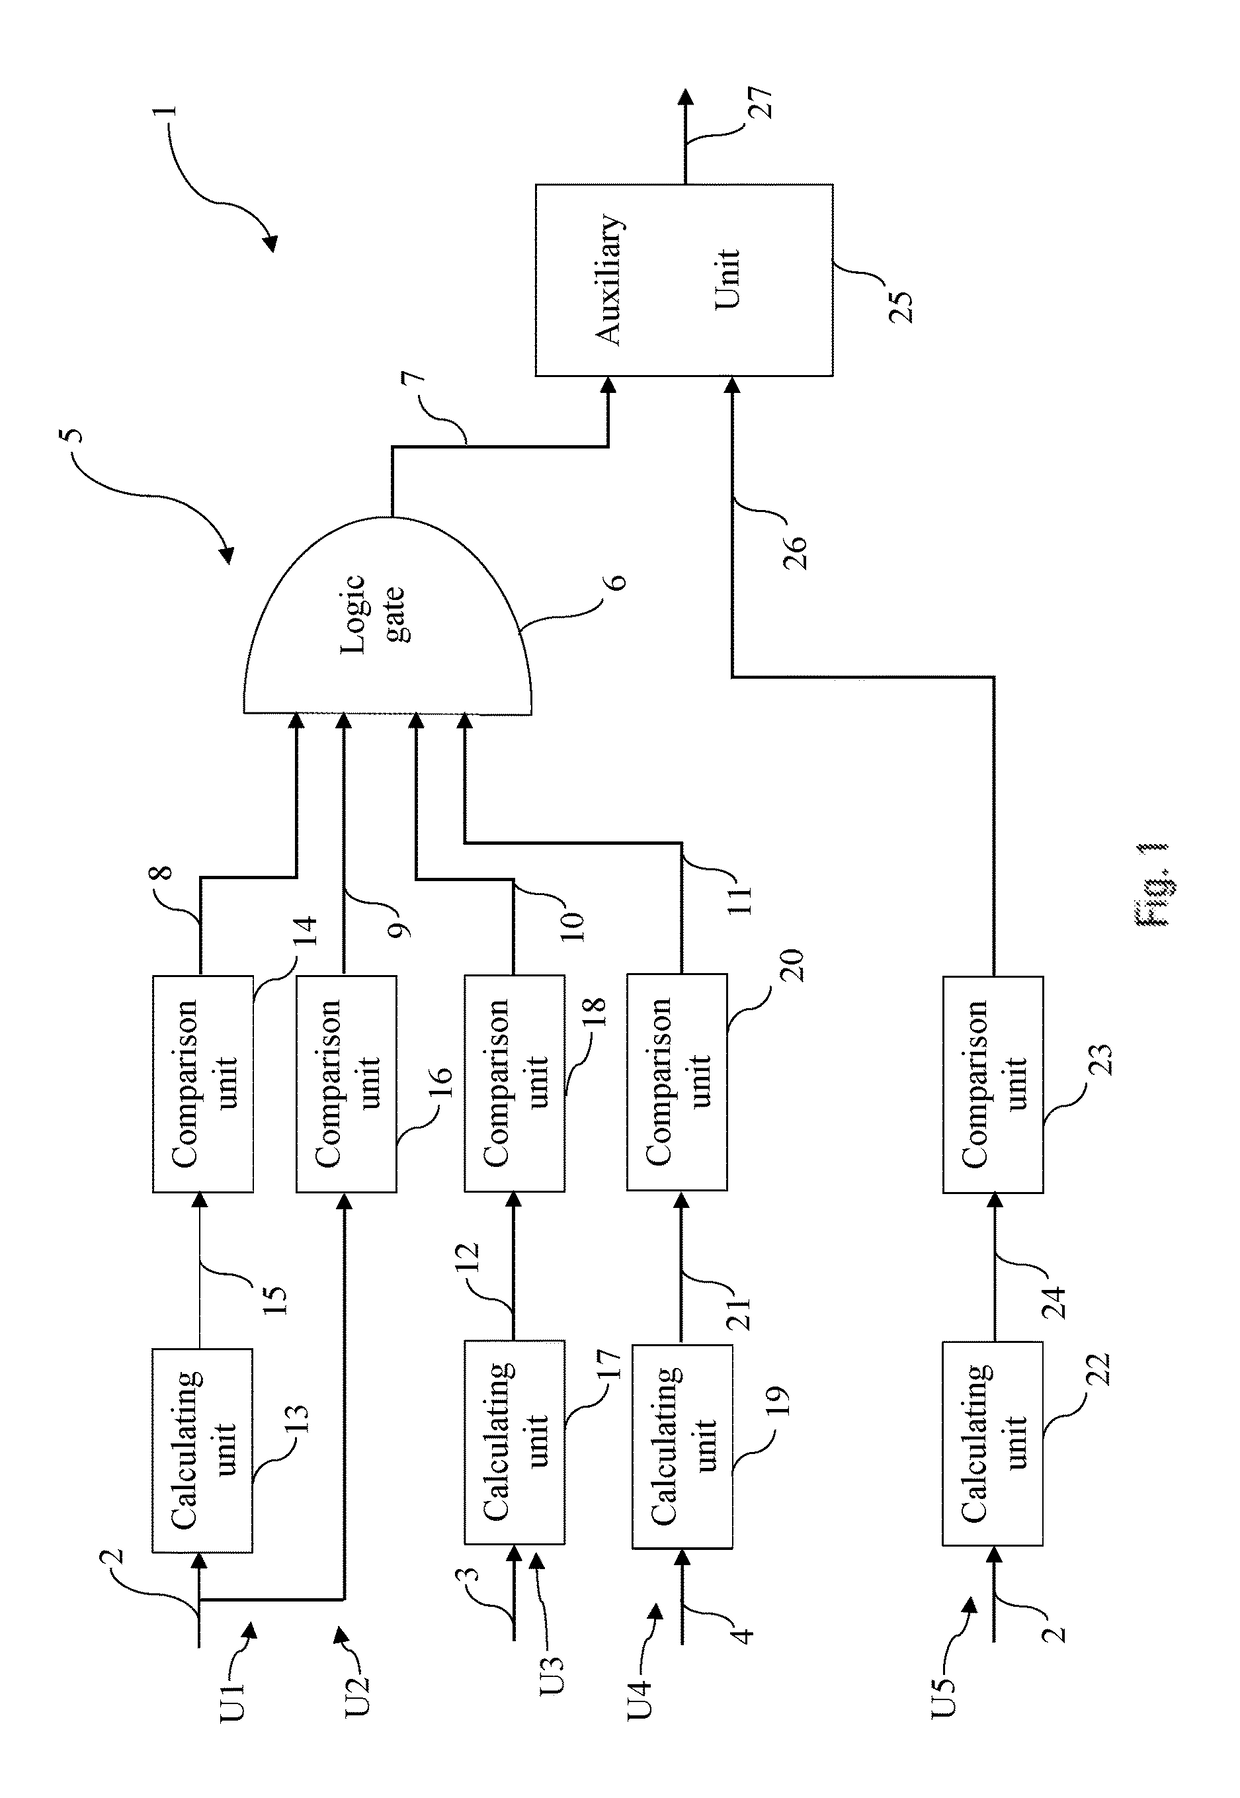 Method and device for automatically detecting an incorrect measurement of a total temperature on an aircraft